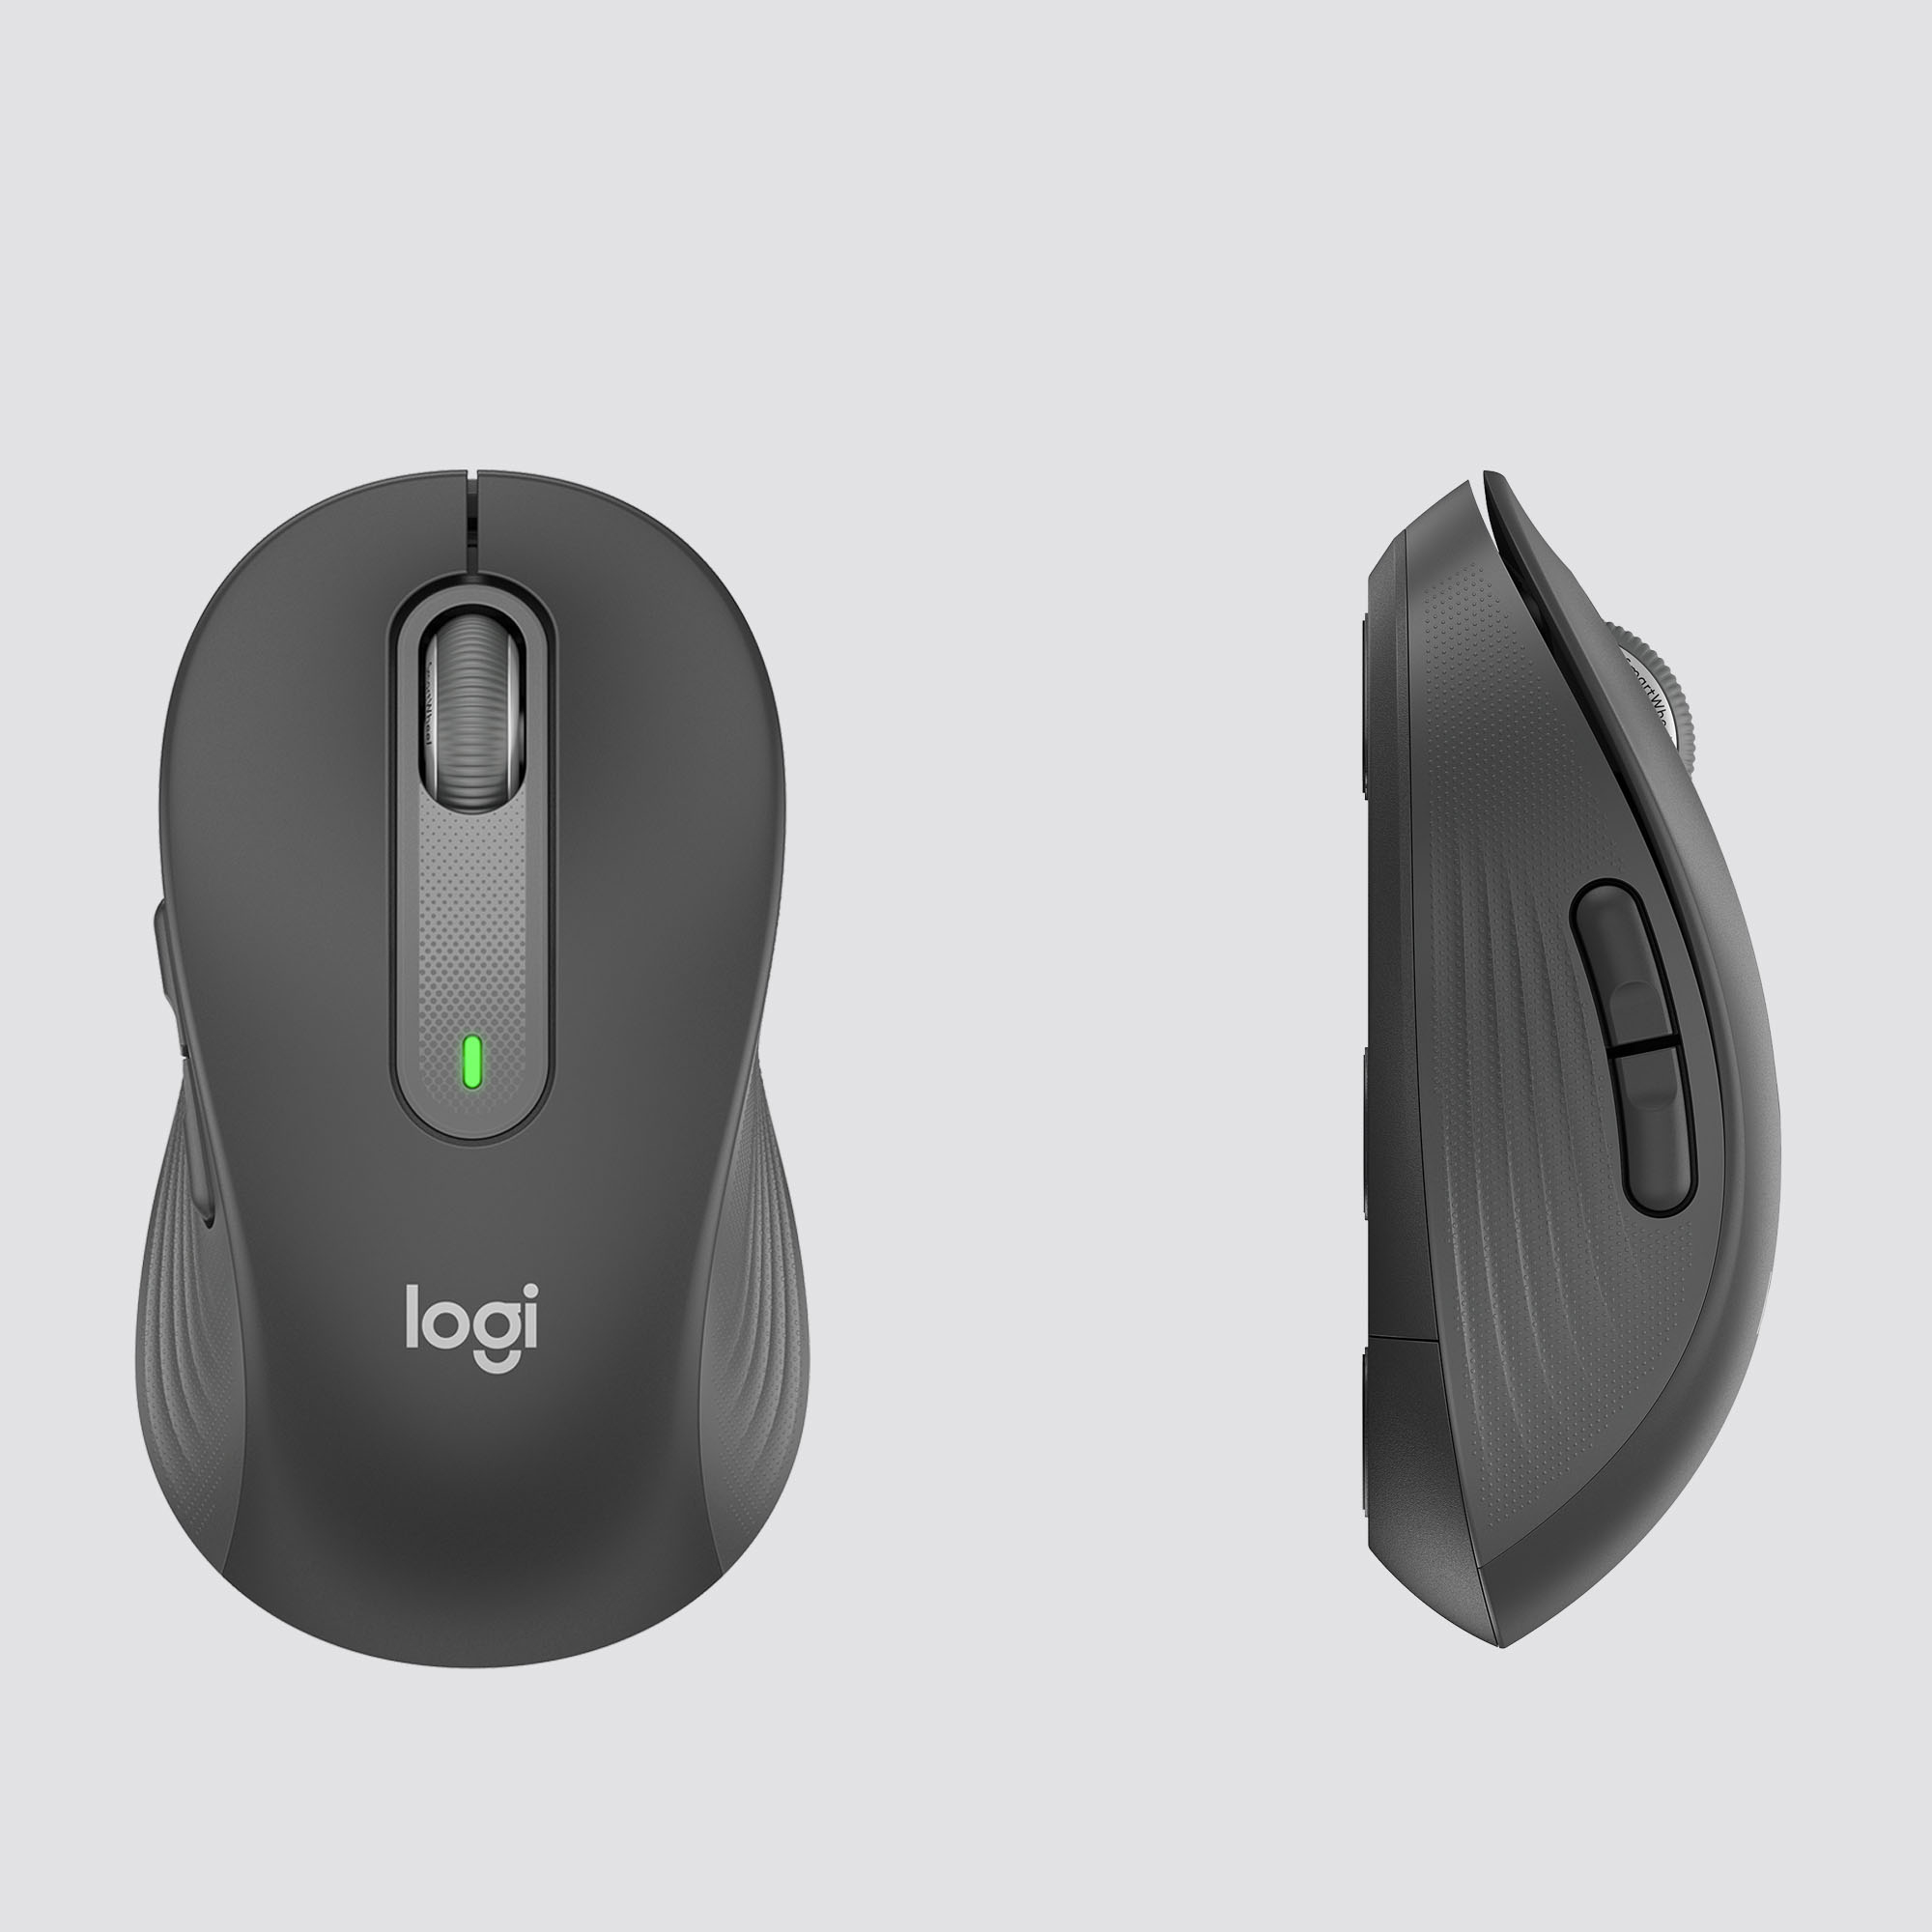 Logitech Signature M650 L Buy Full-size with Mouse Clicks Best Silent 910-006231 Graphite - Wireless Scroll